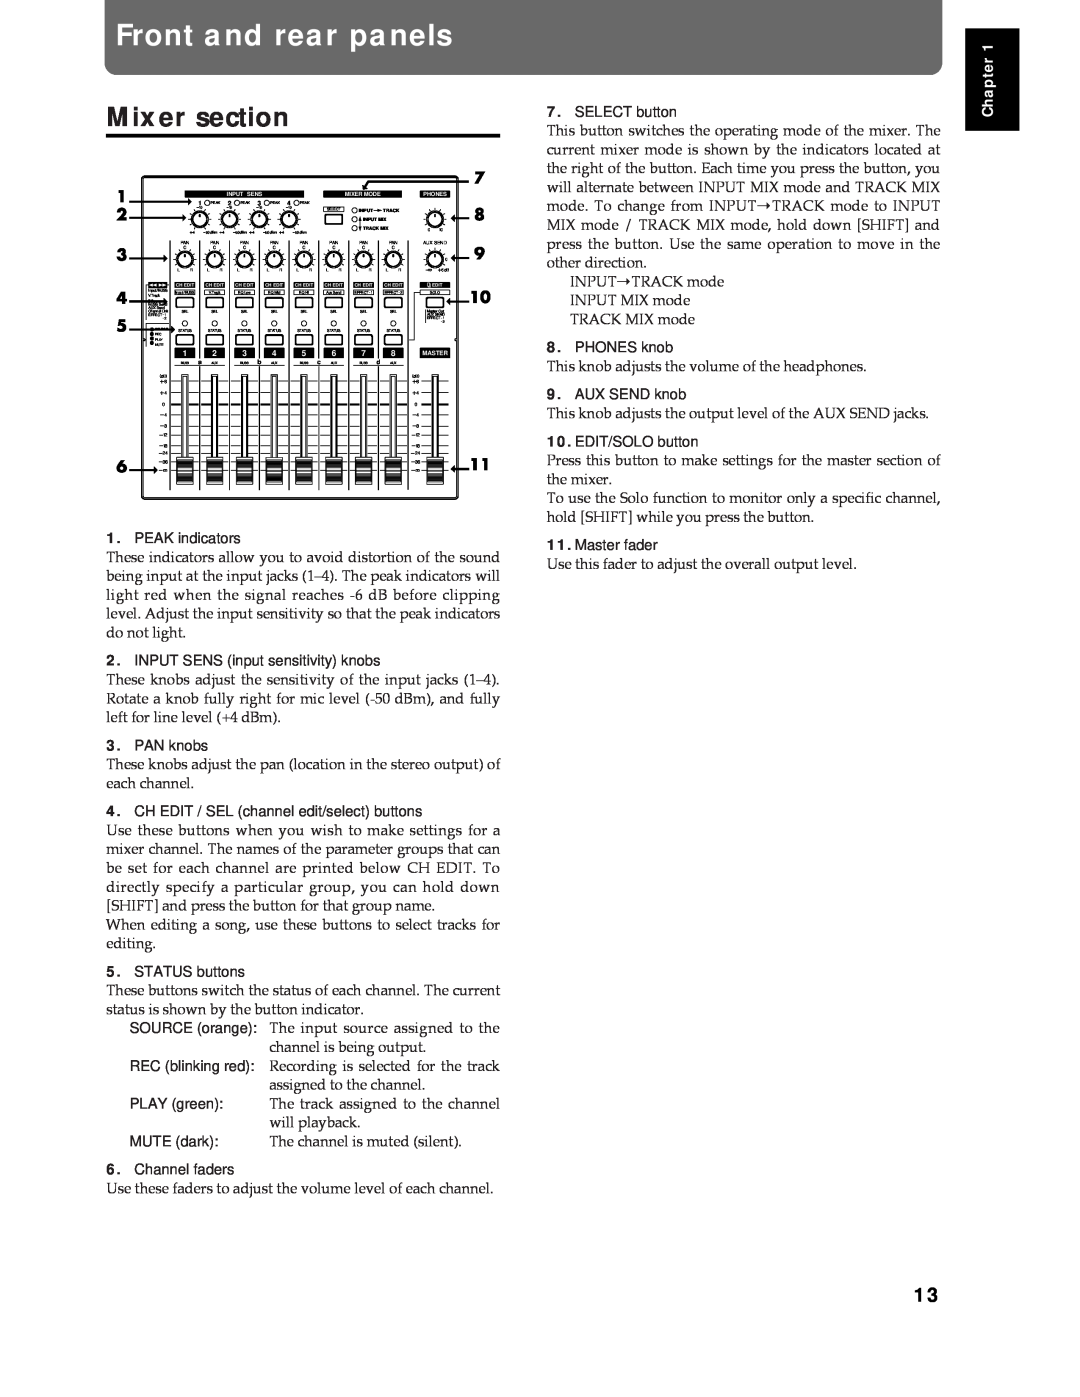 Roland Vs-880 important safety instructions Front and rear panels, Mixer section, Chapter 